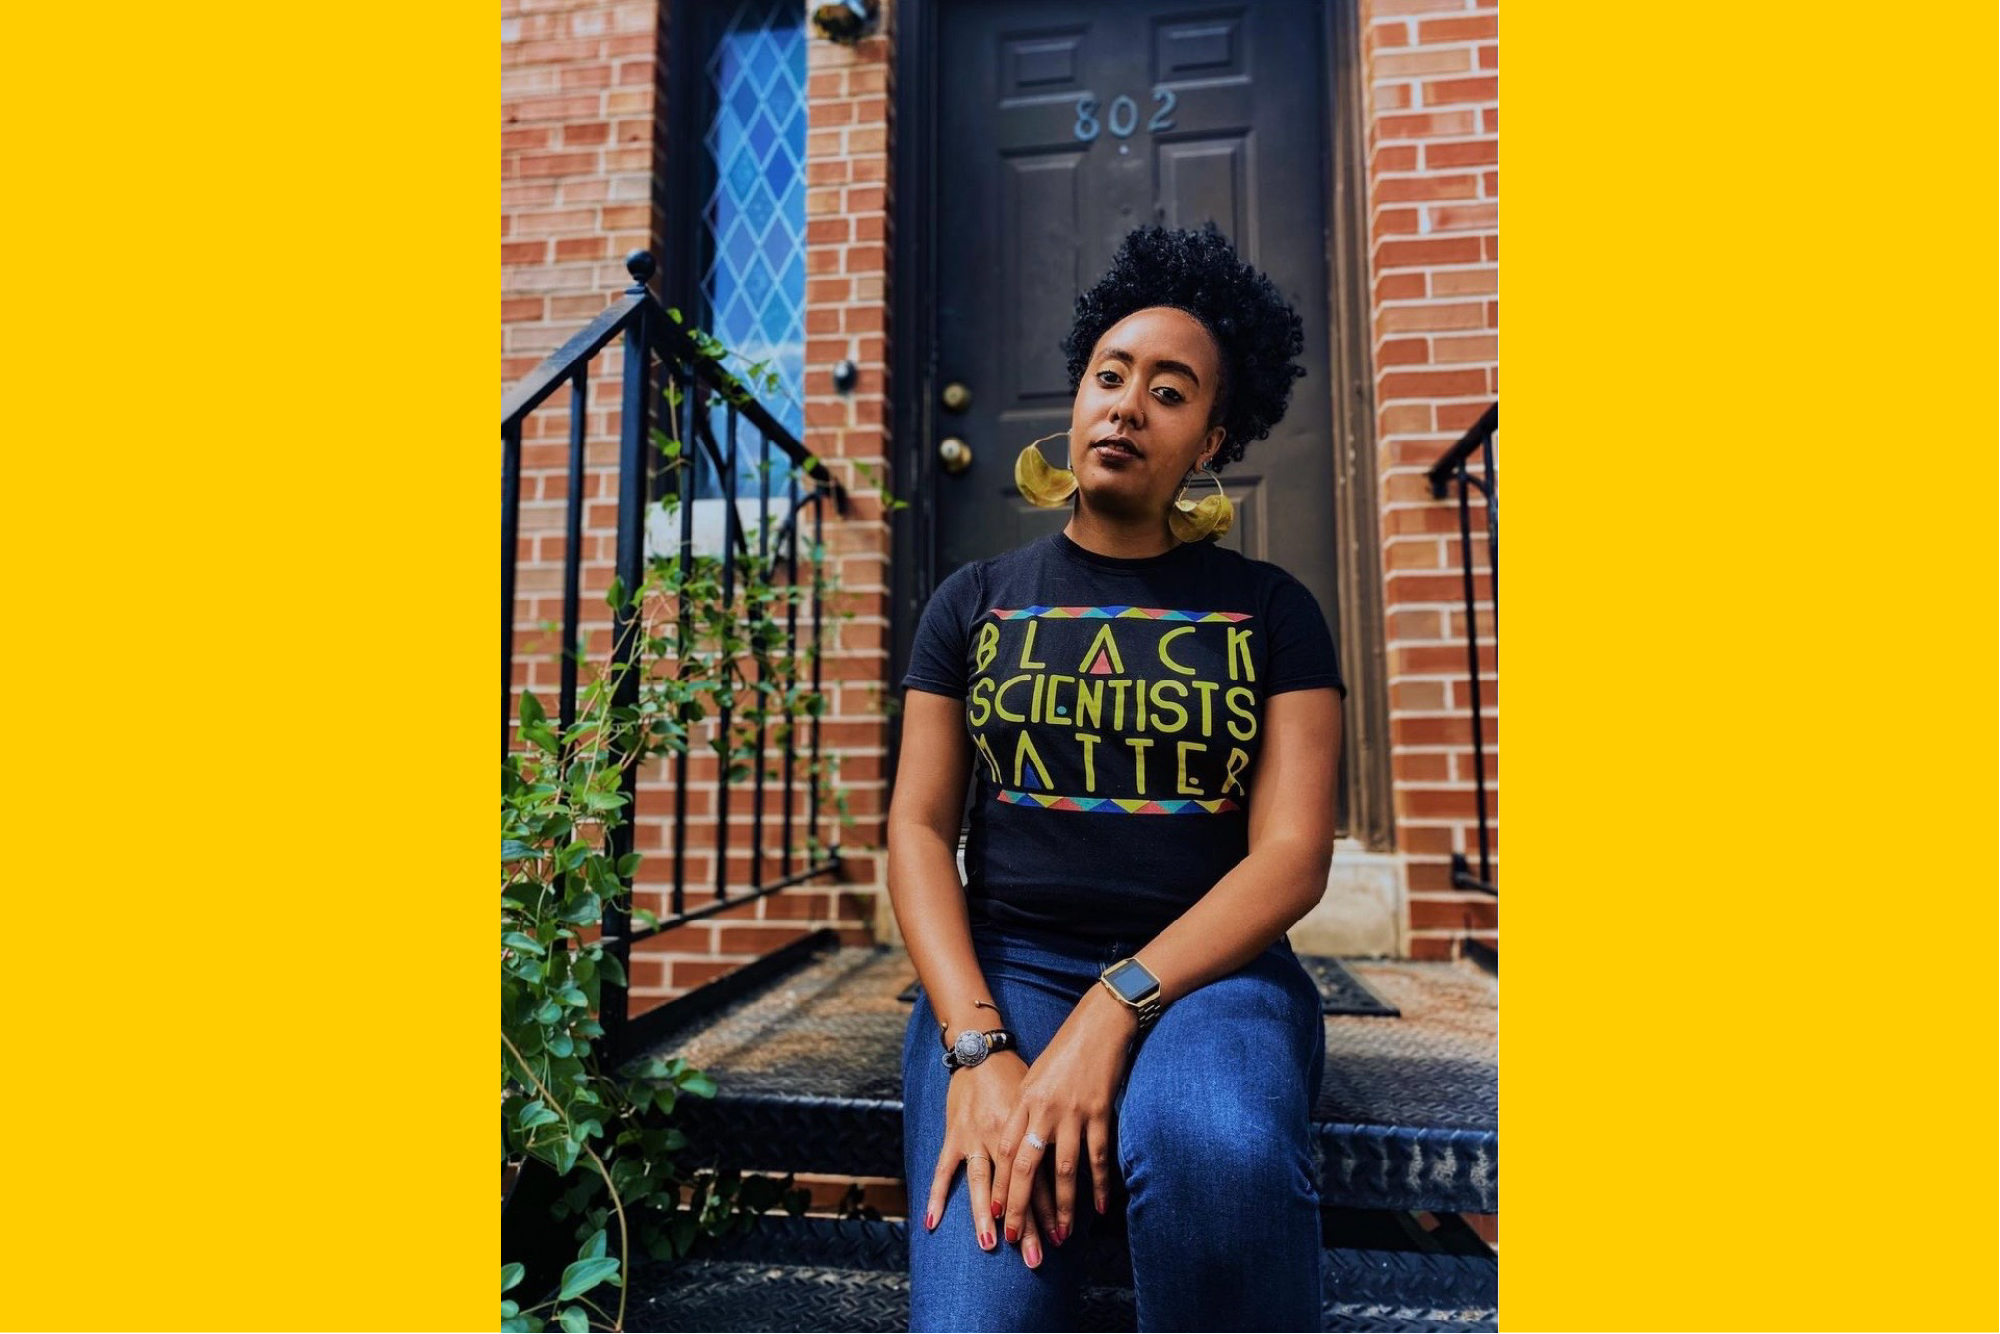 Dante Johnson sits on an outdoor stoop wearing a t-shirt that reads Black Scientists Matter.